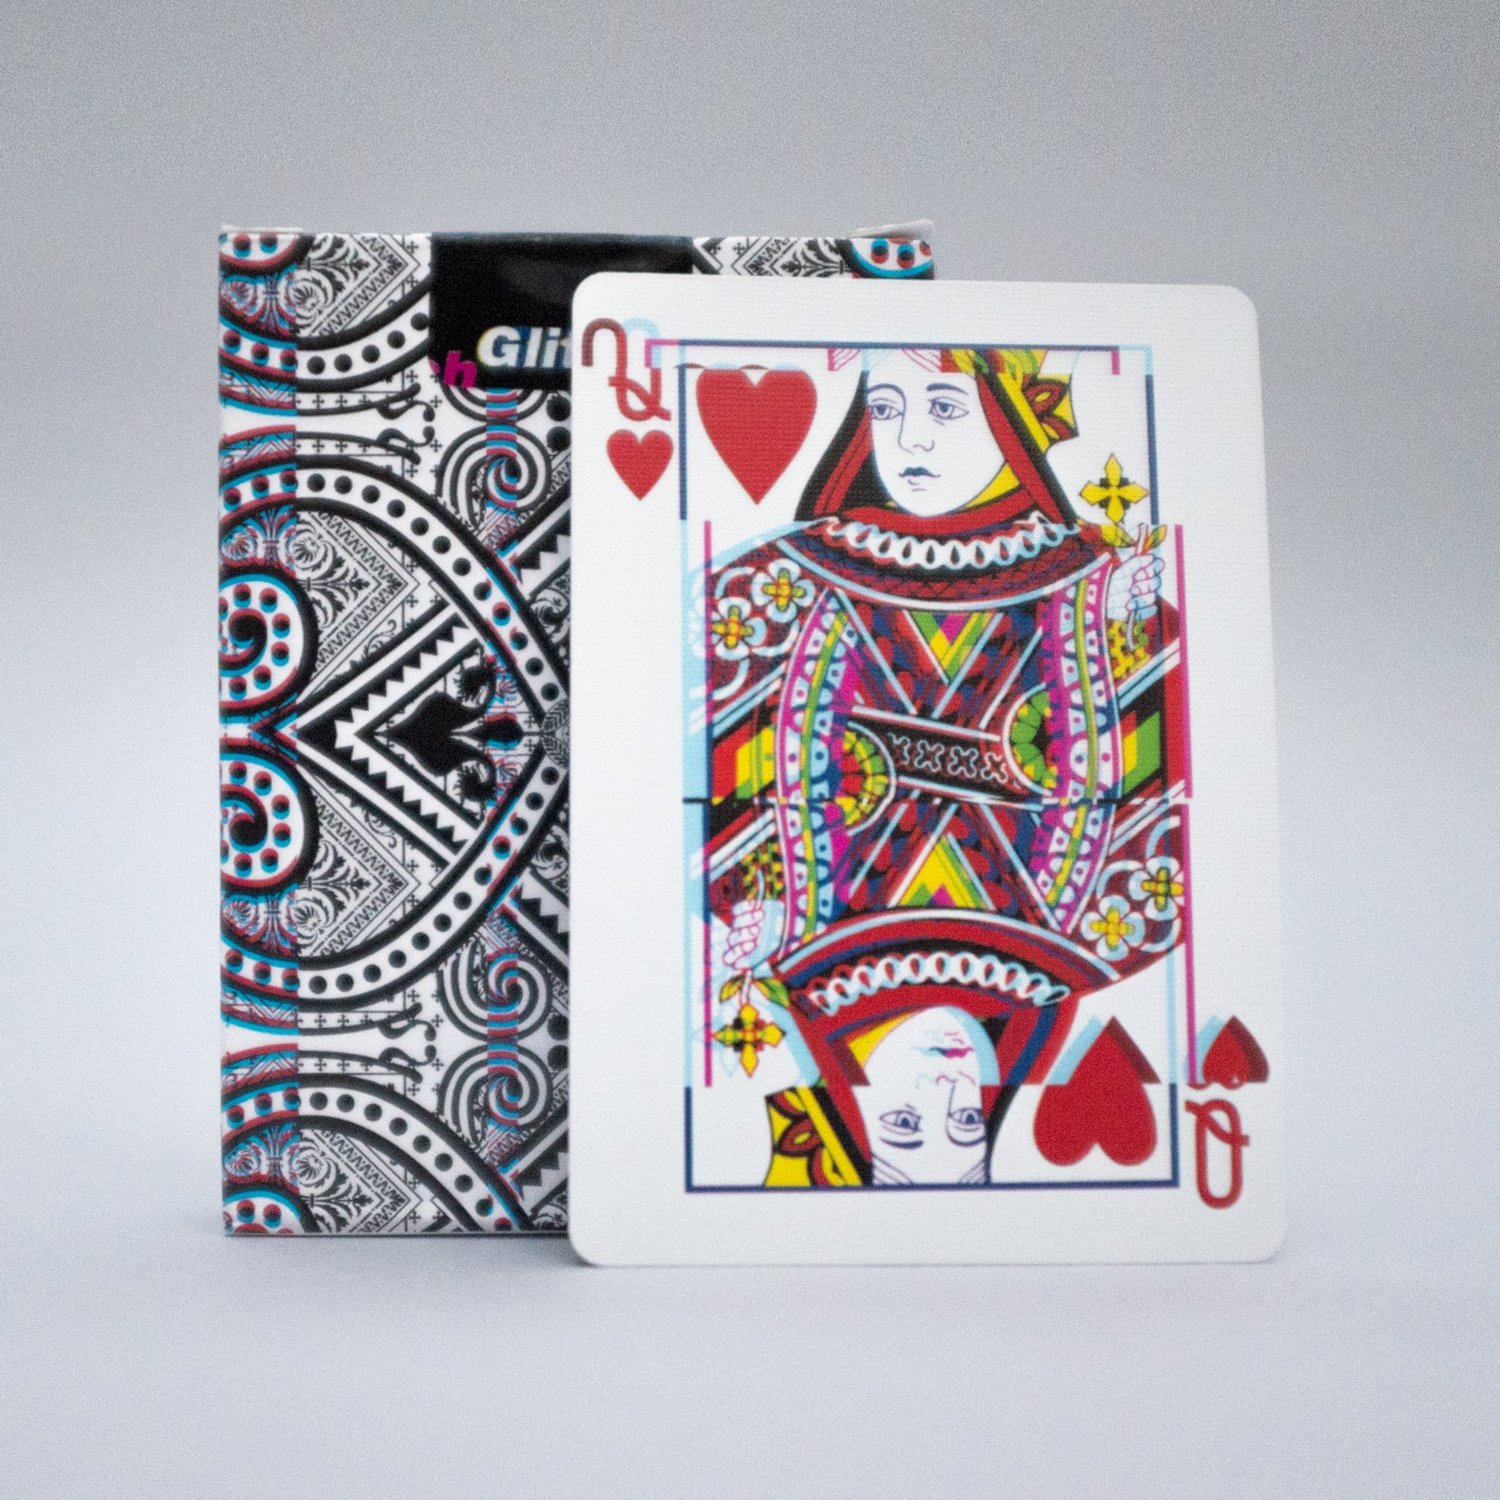 Get Trippy On Poker Night With These Glitch Playing Cards